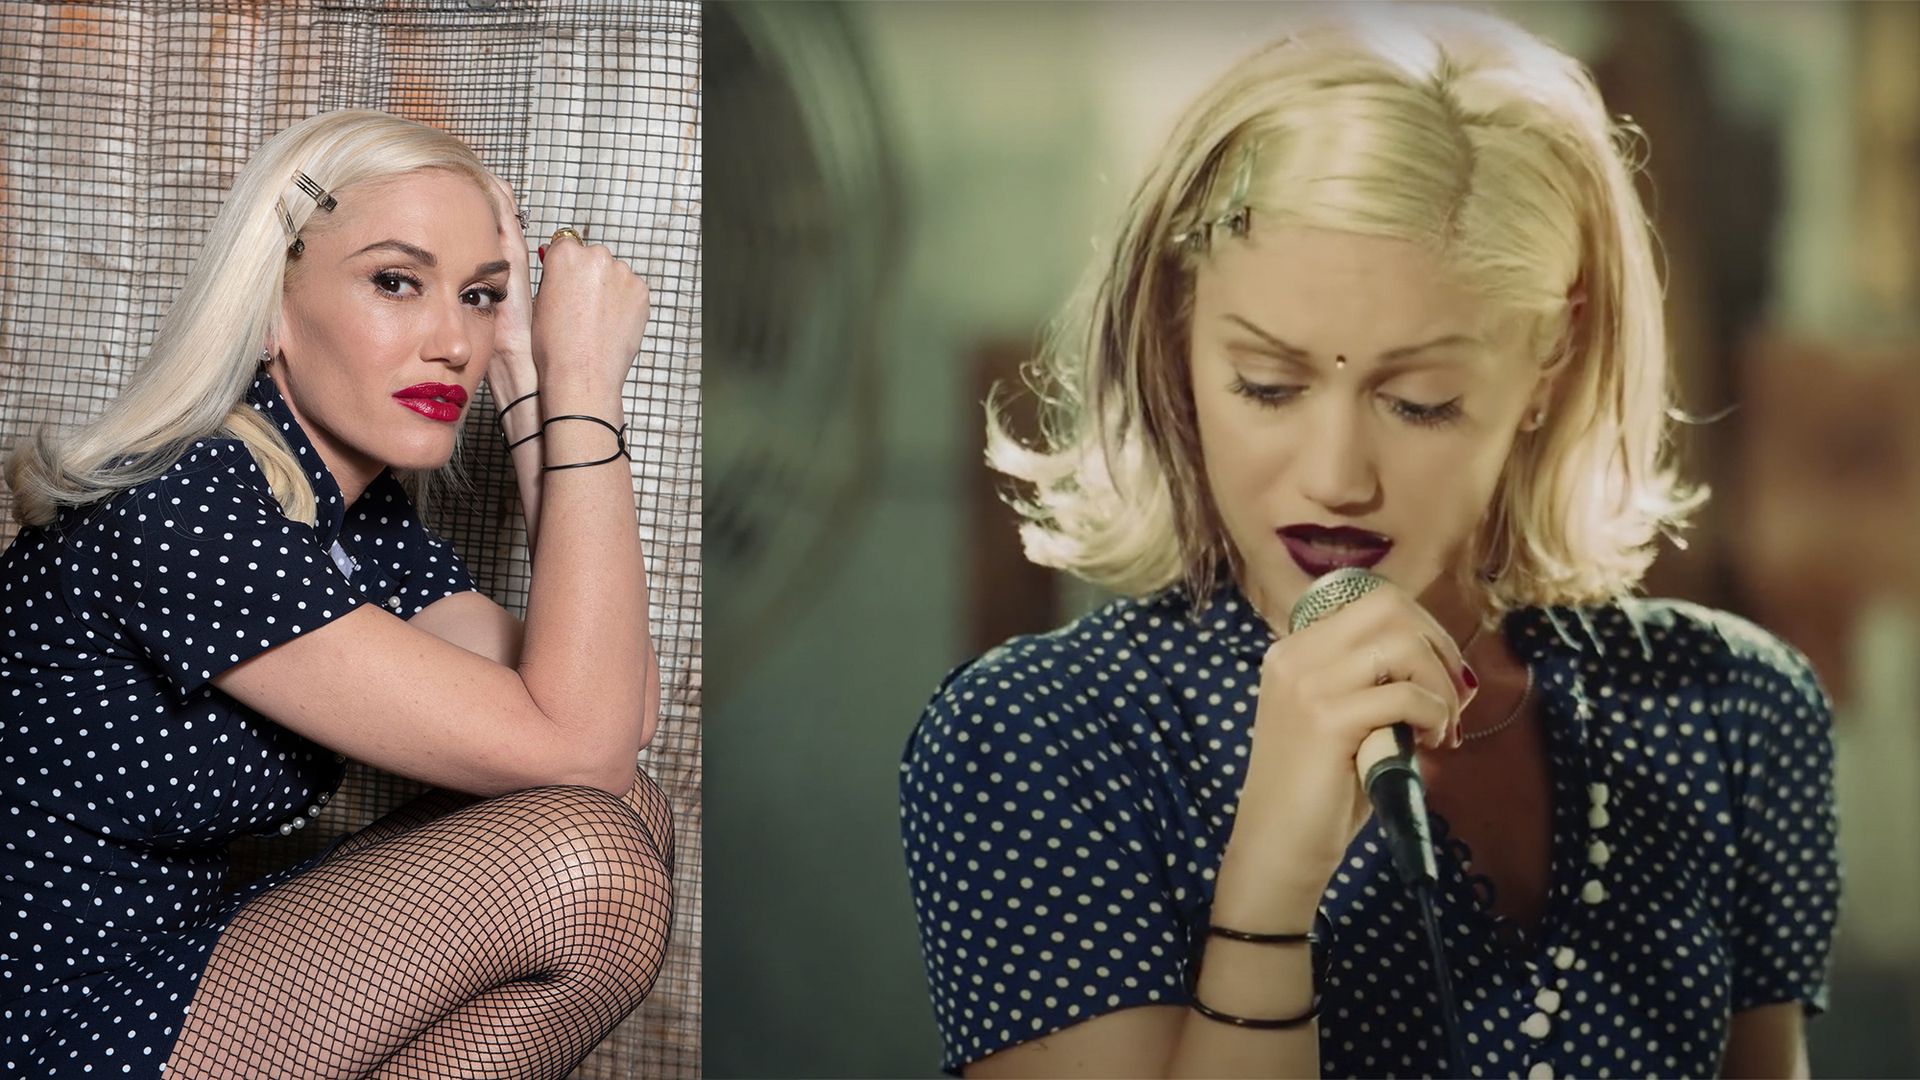 Gwen Stefani in 2021 and in 1995